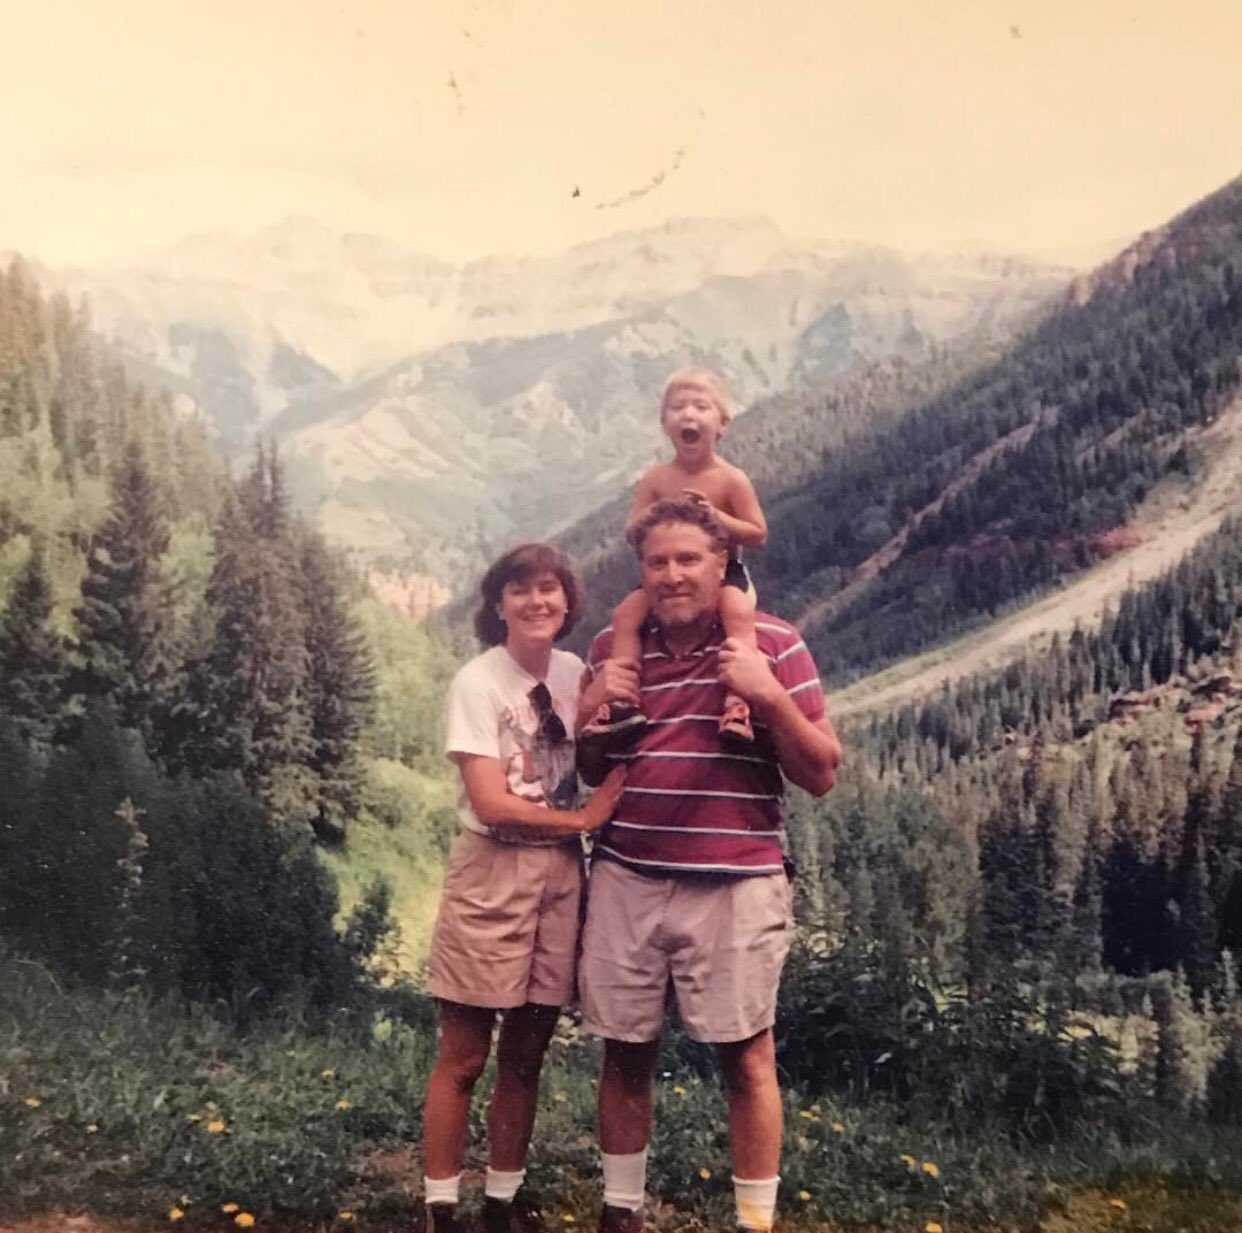 Mike Posner visiting Telluride, Colorado with his parents in the early 1990s
